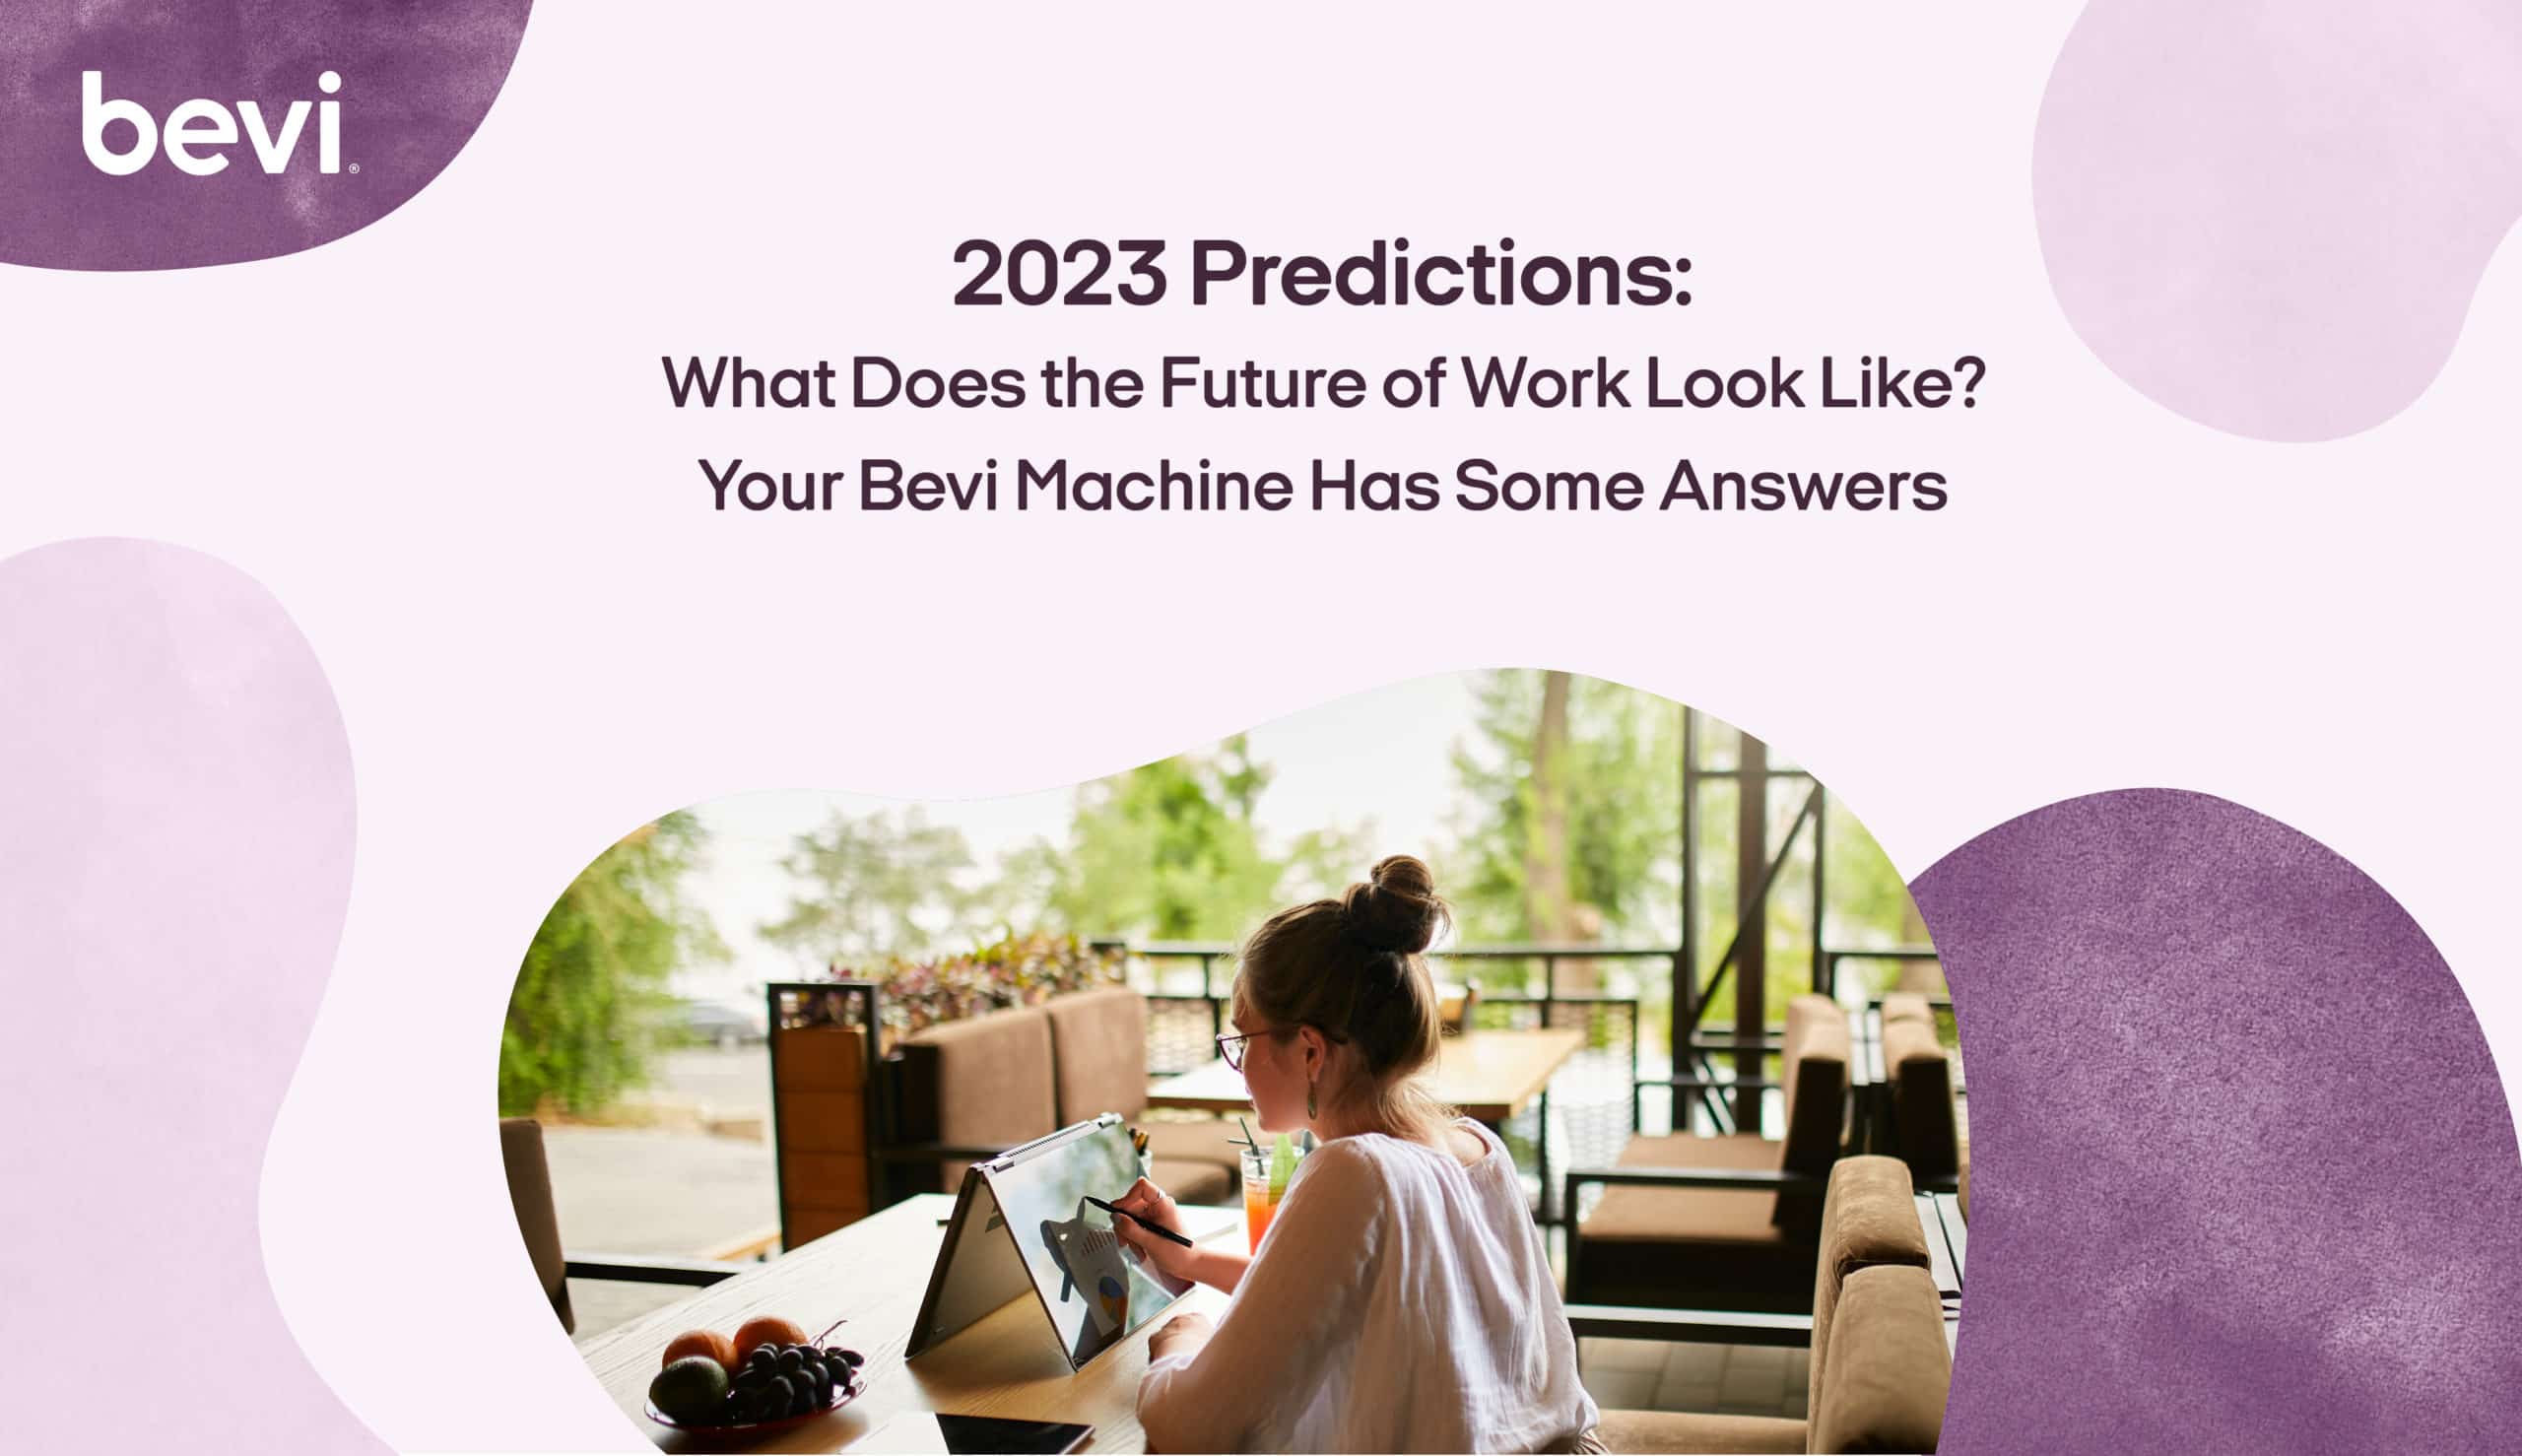 2023 Predictions: What Does the Future of Work Look Like? Your Bevi Machine Has Some Answers